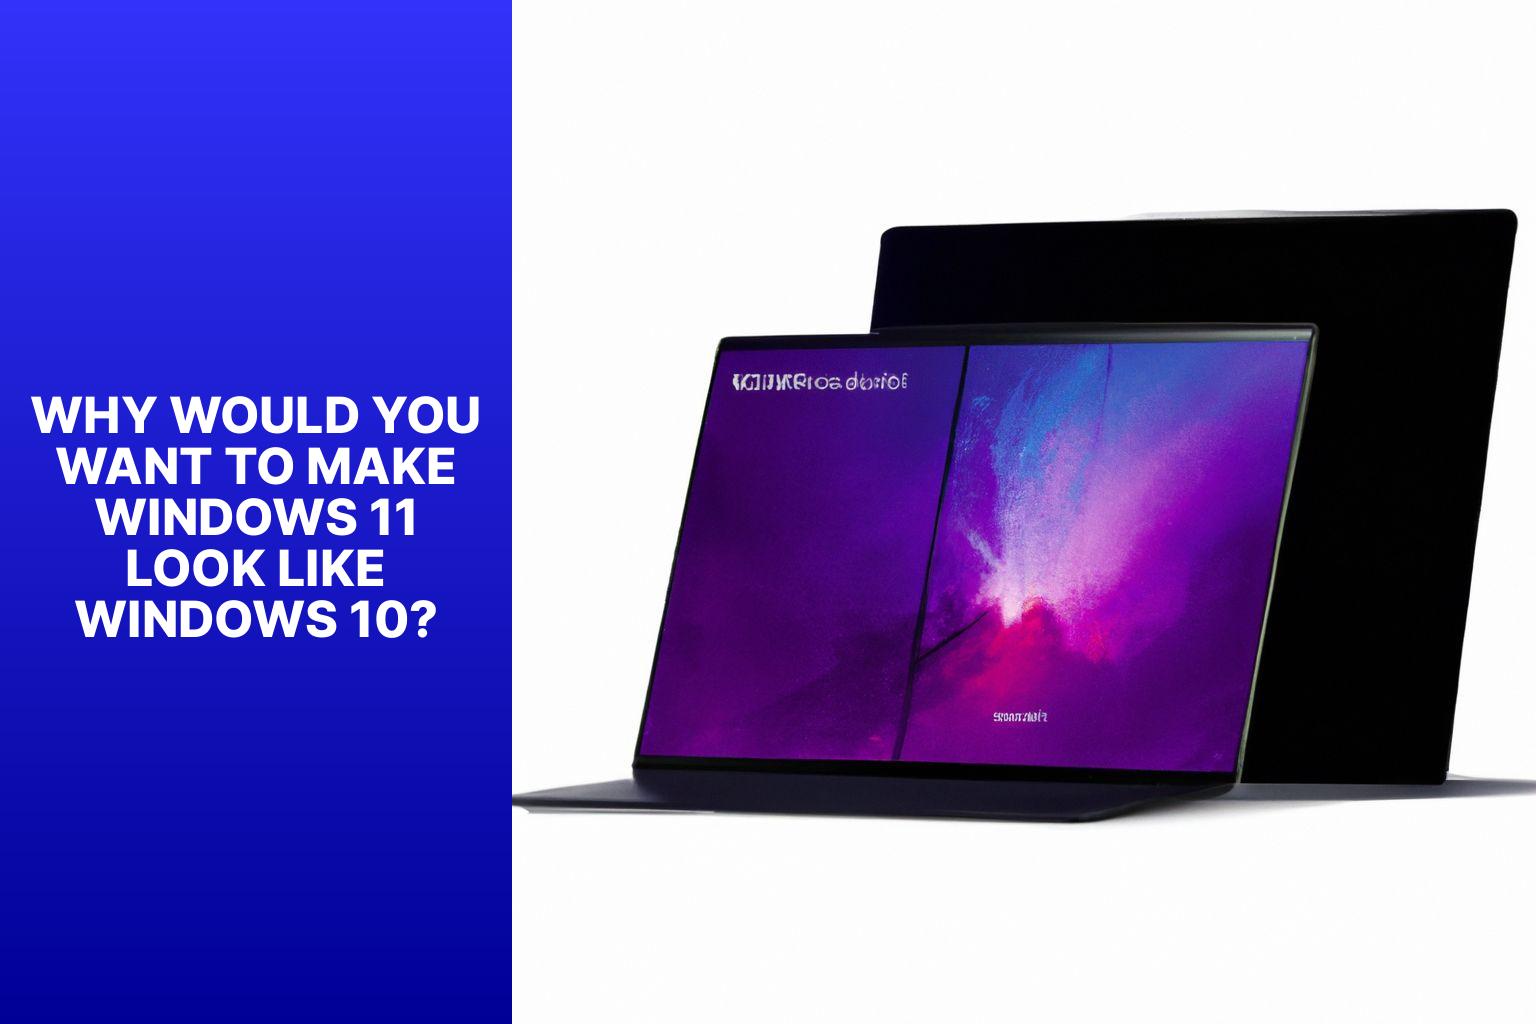 Why Would You Want to Make Windows 11 Look Like Windows 10? - how to make windows 11 look like windows 10 